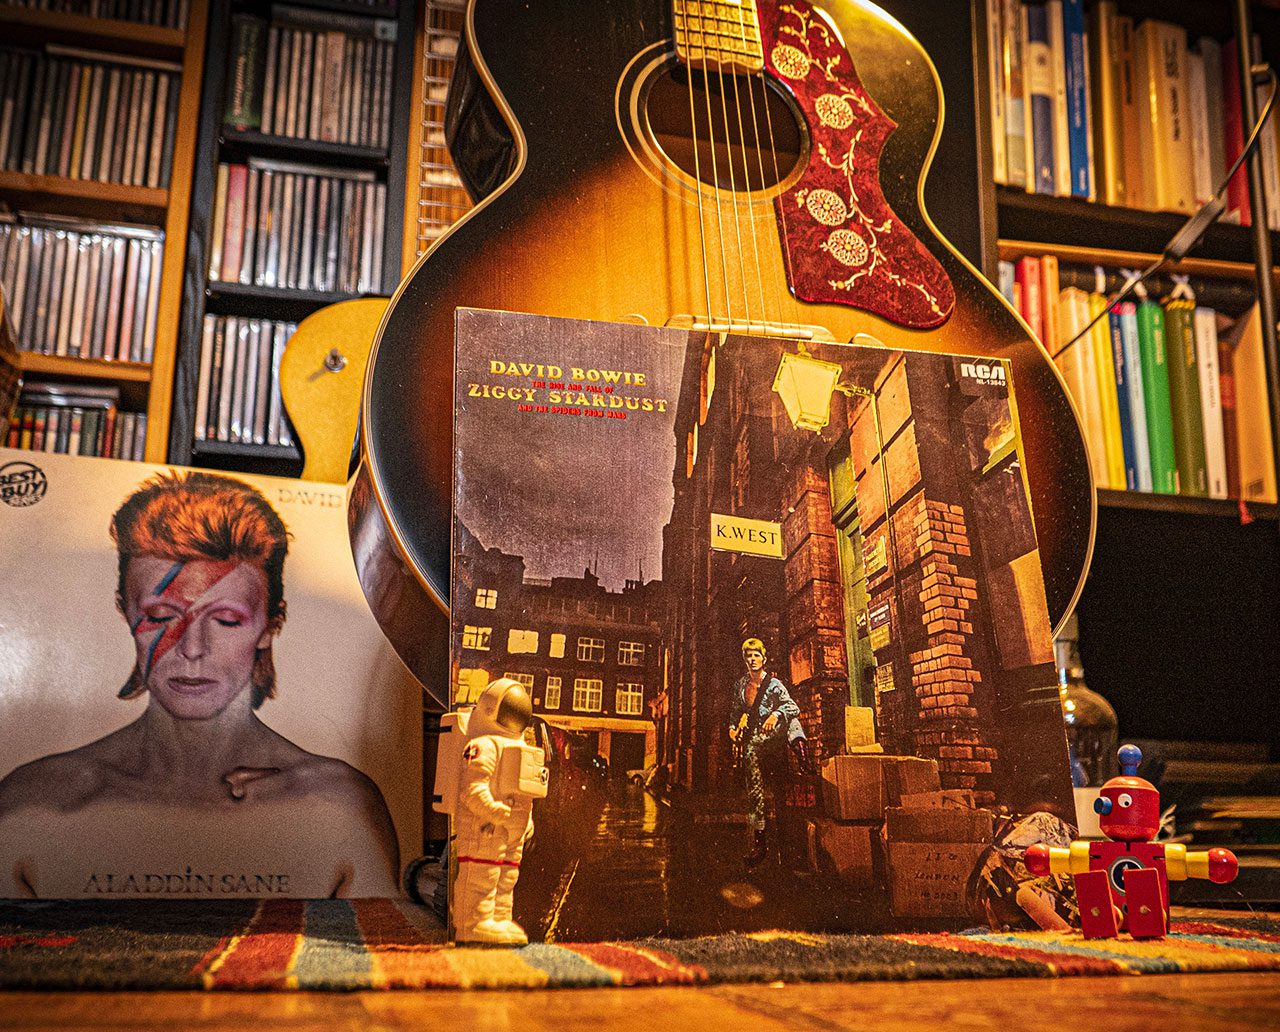 David Bowie – The Rise And Fall Of Ziggy Stardust And The Spiders From Mars recensione album di Antonio Boschi